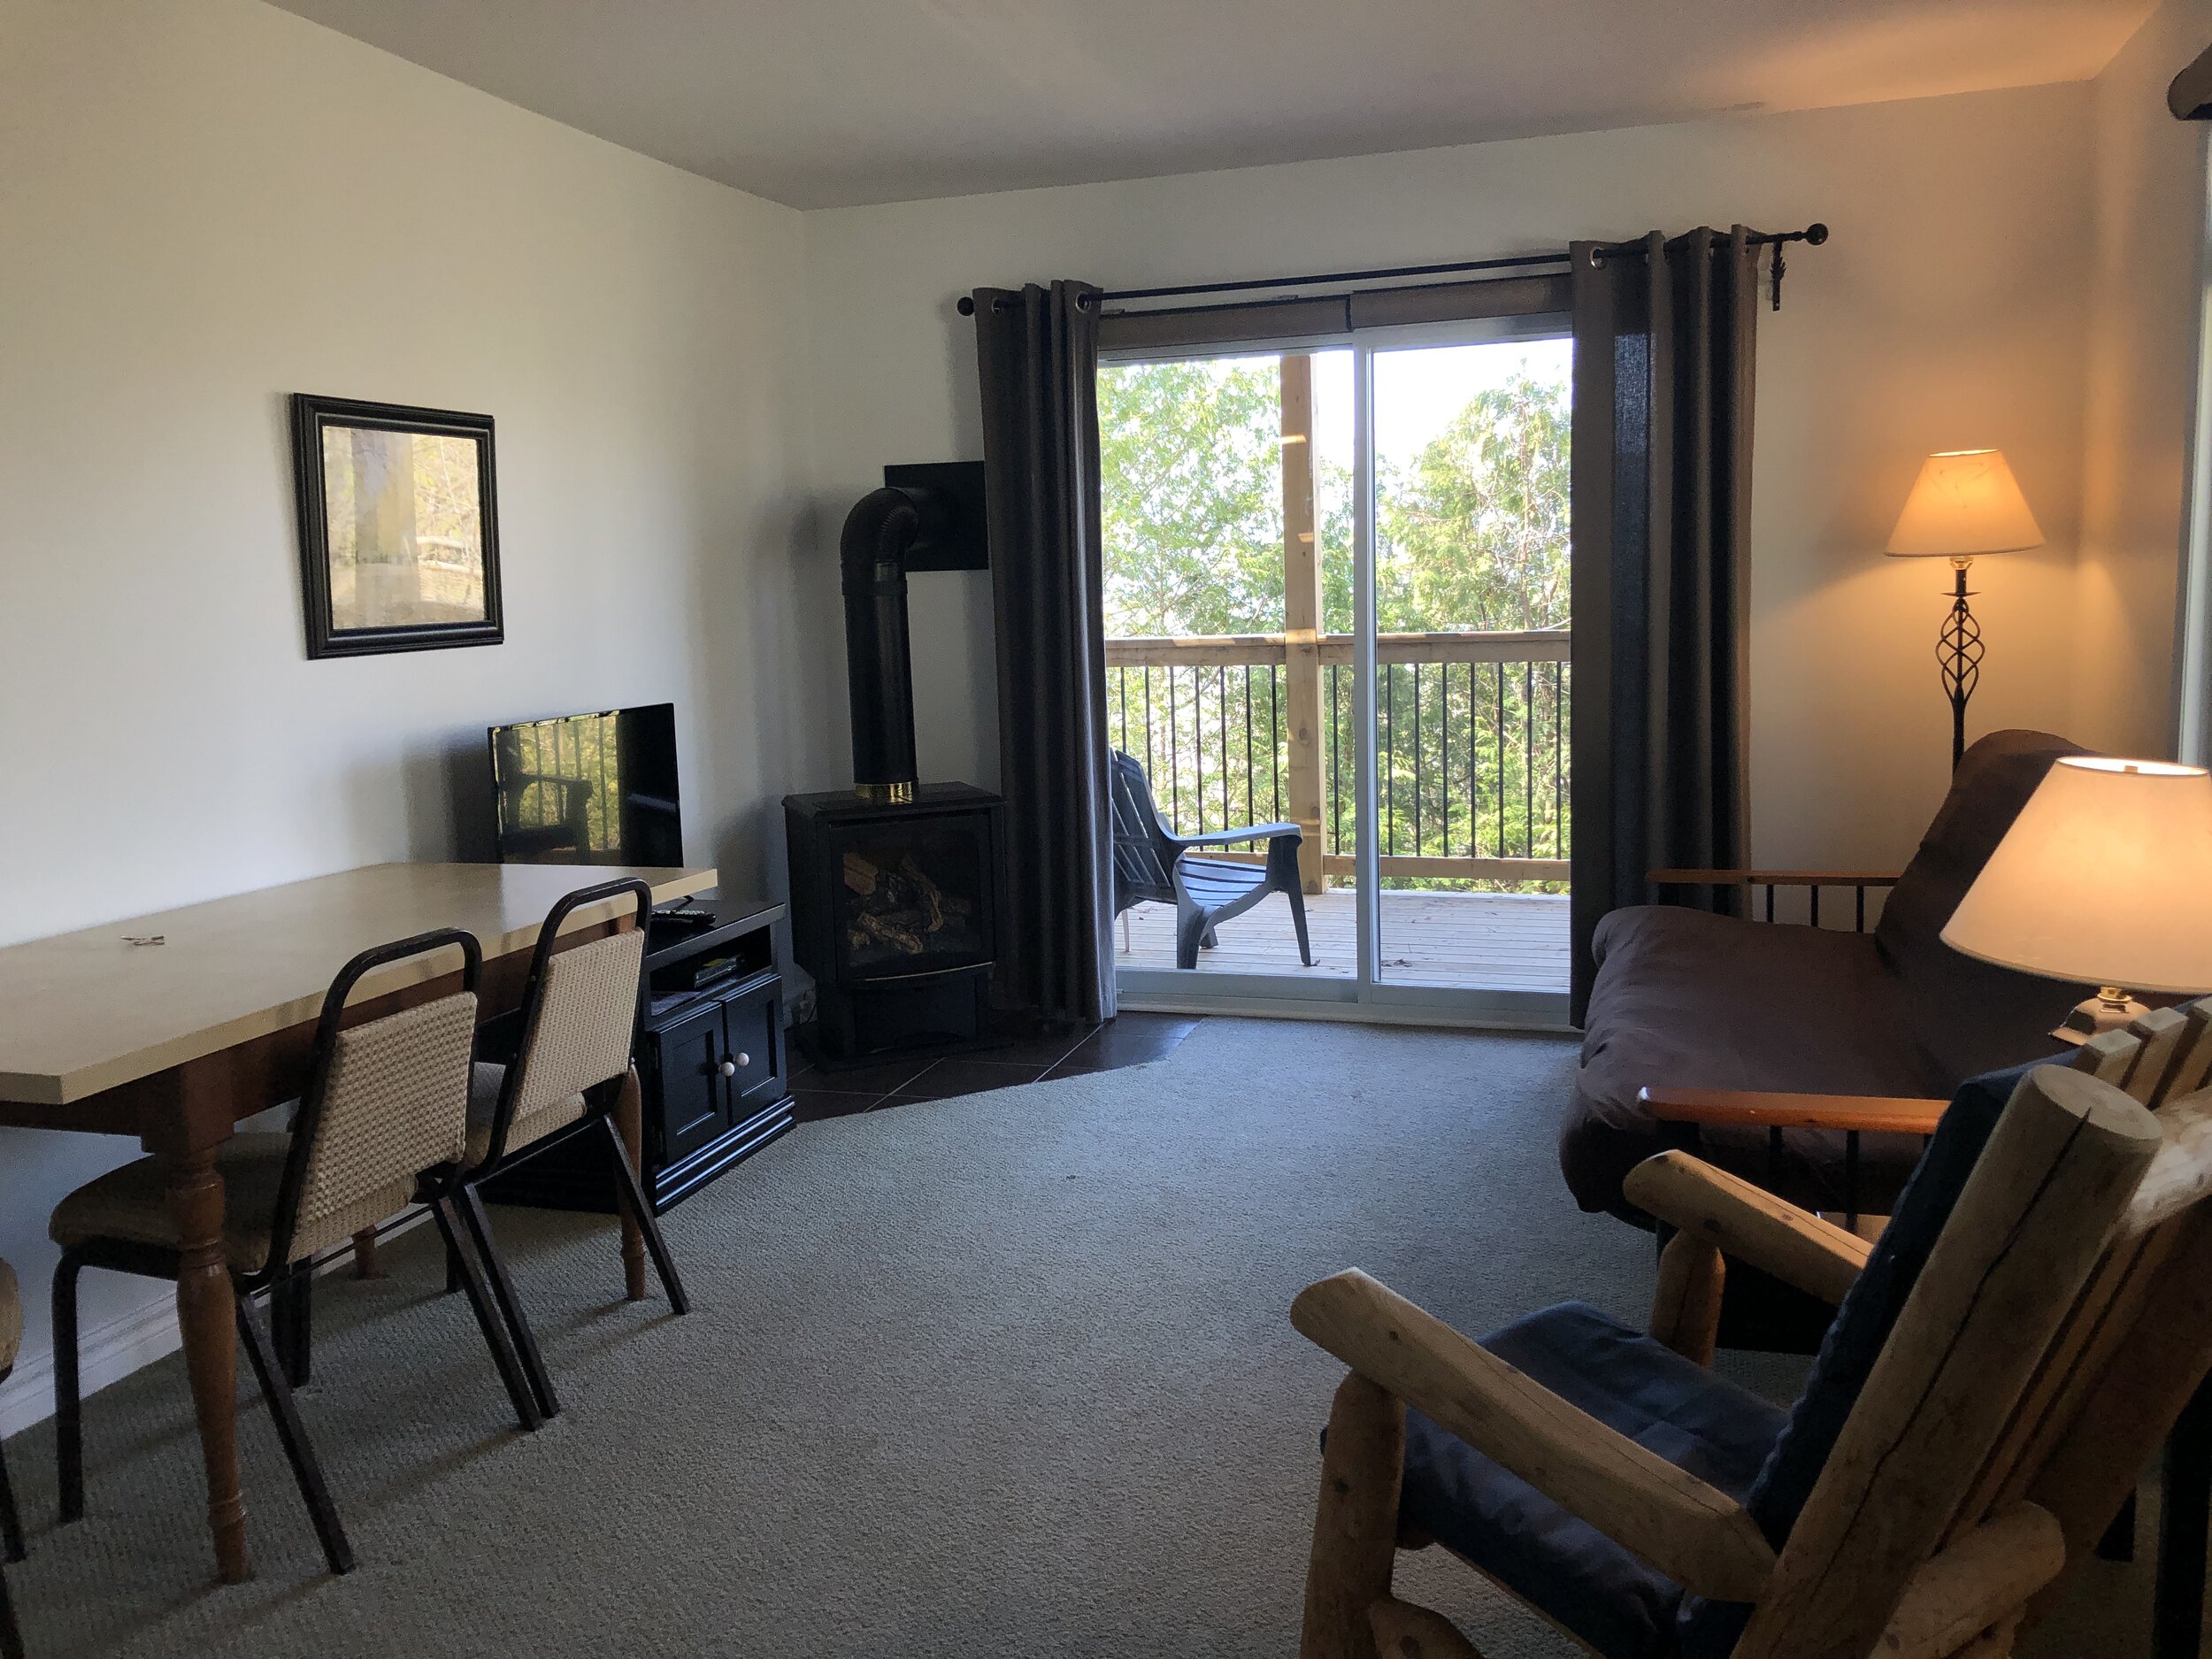 Living room with futon, gas fireplace, tv